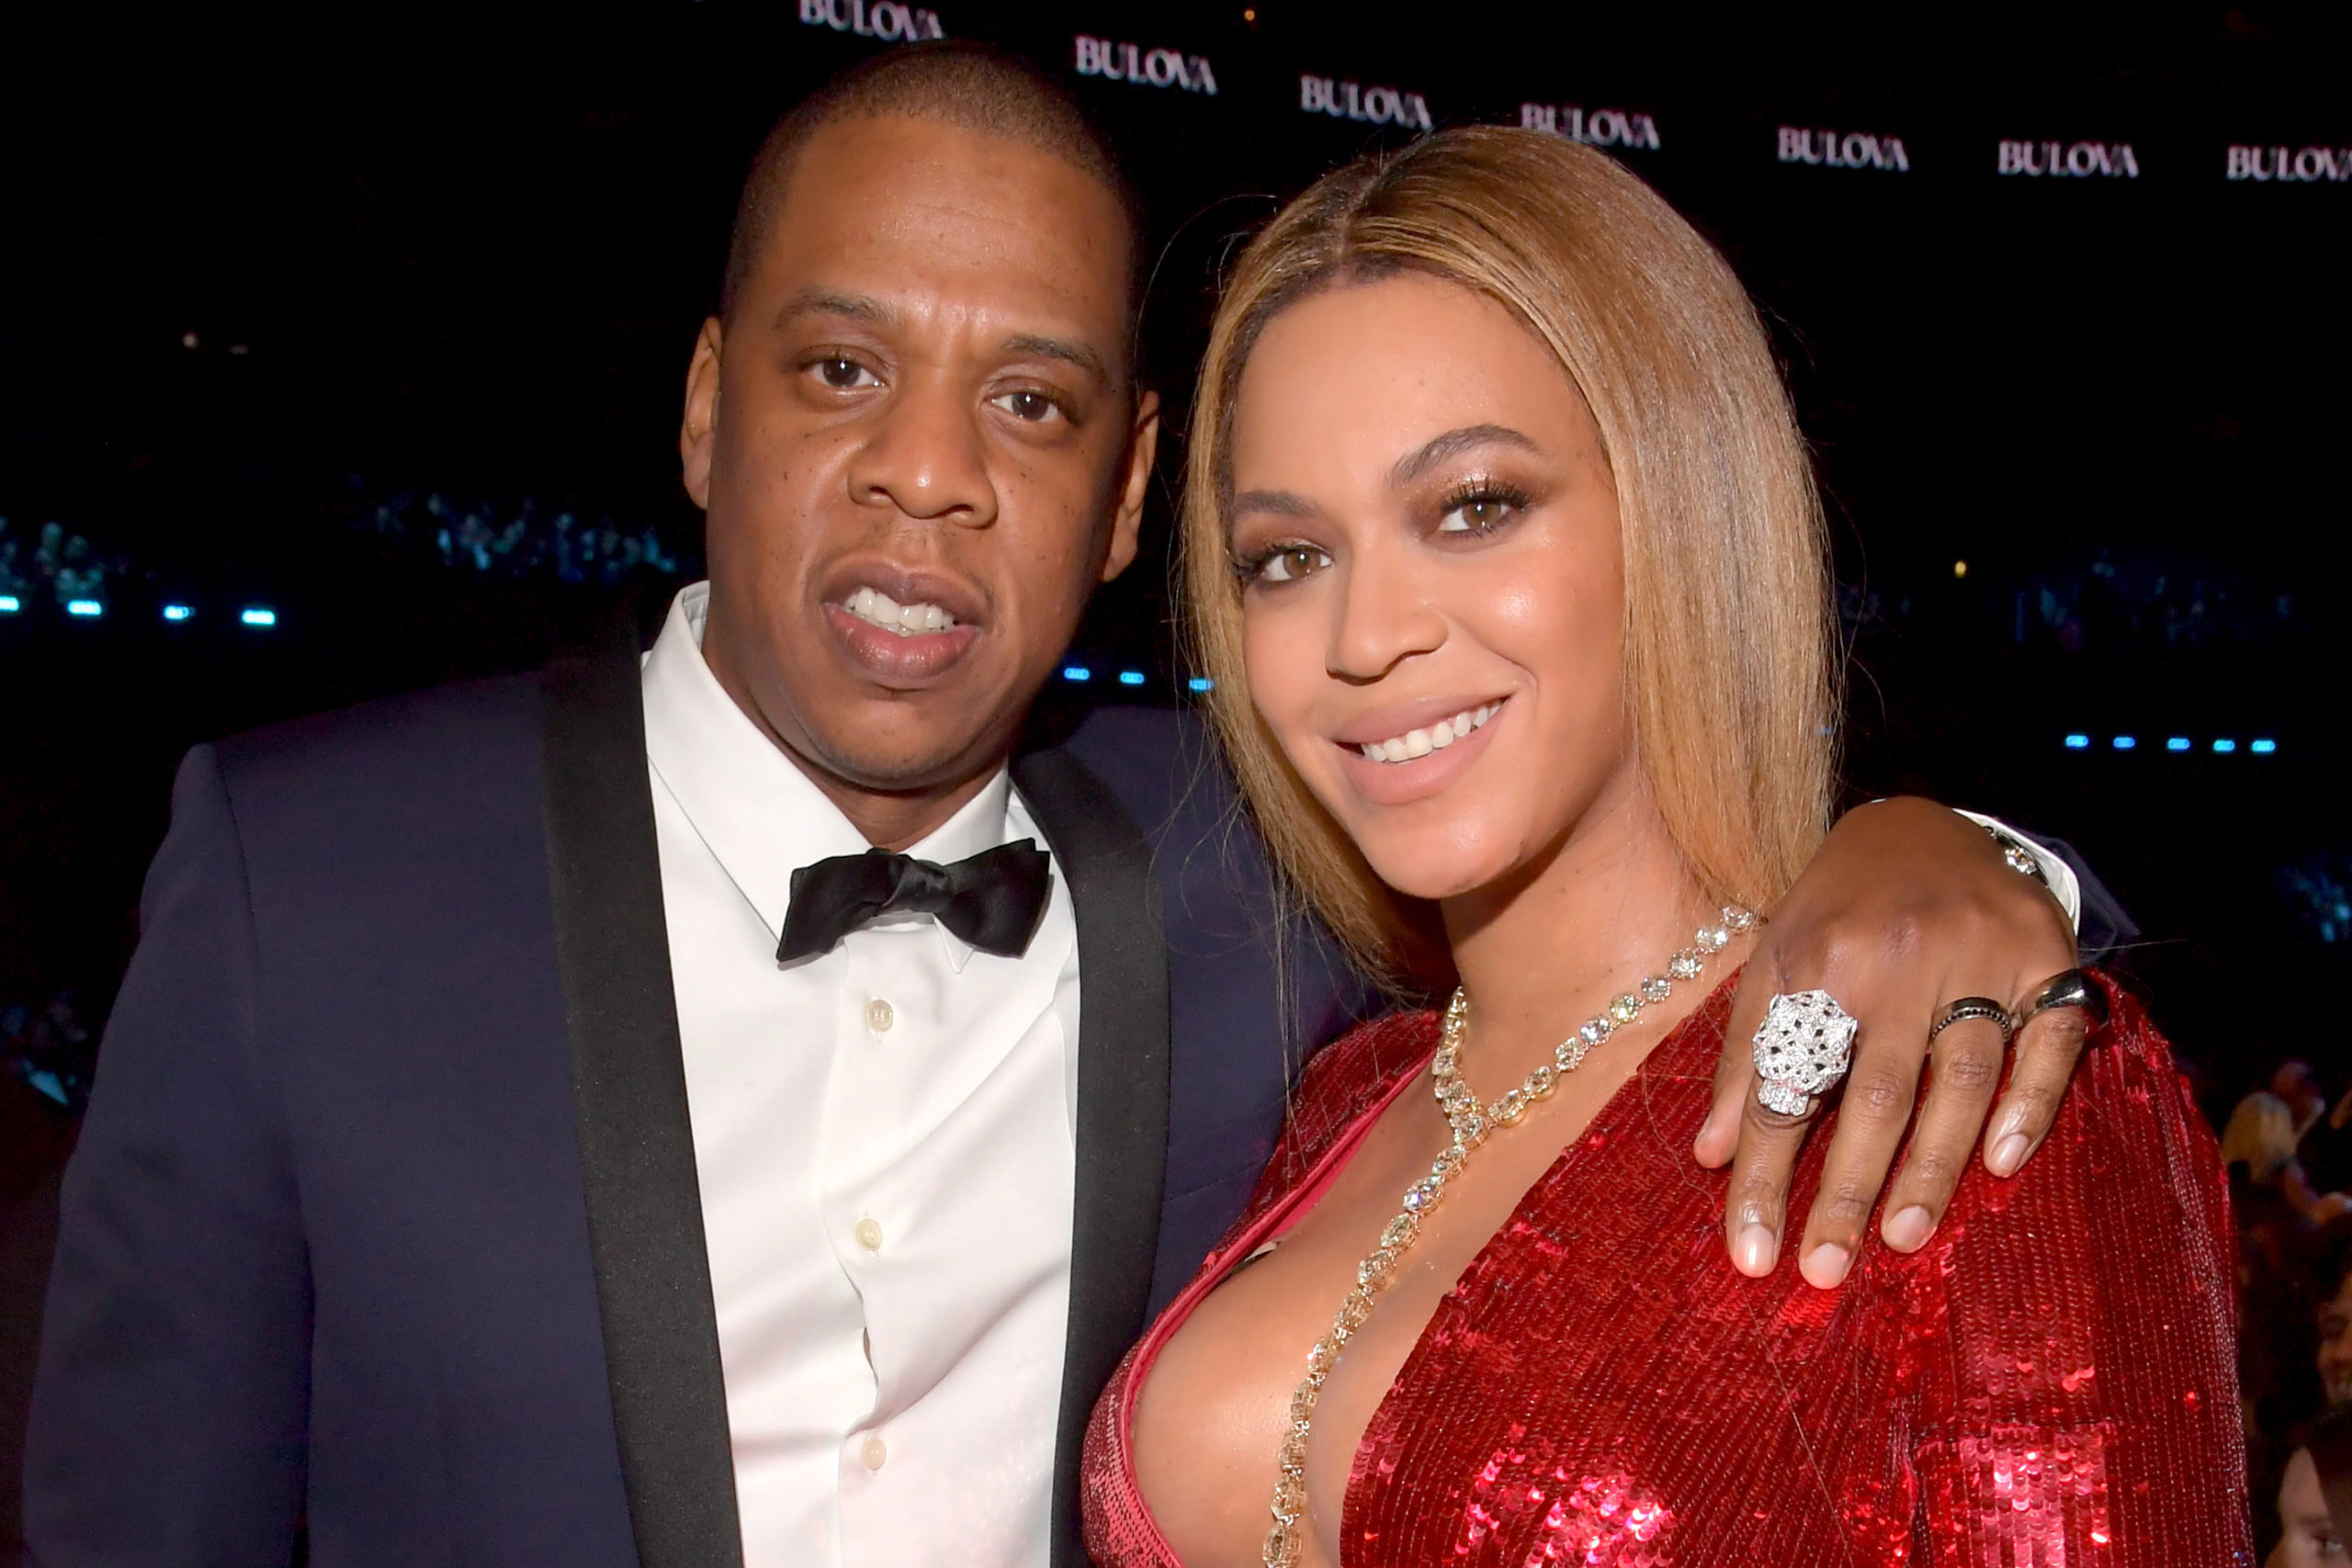 Who Beyoncé dated before Jay-Z?